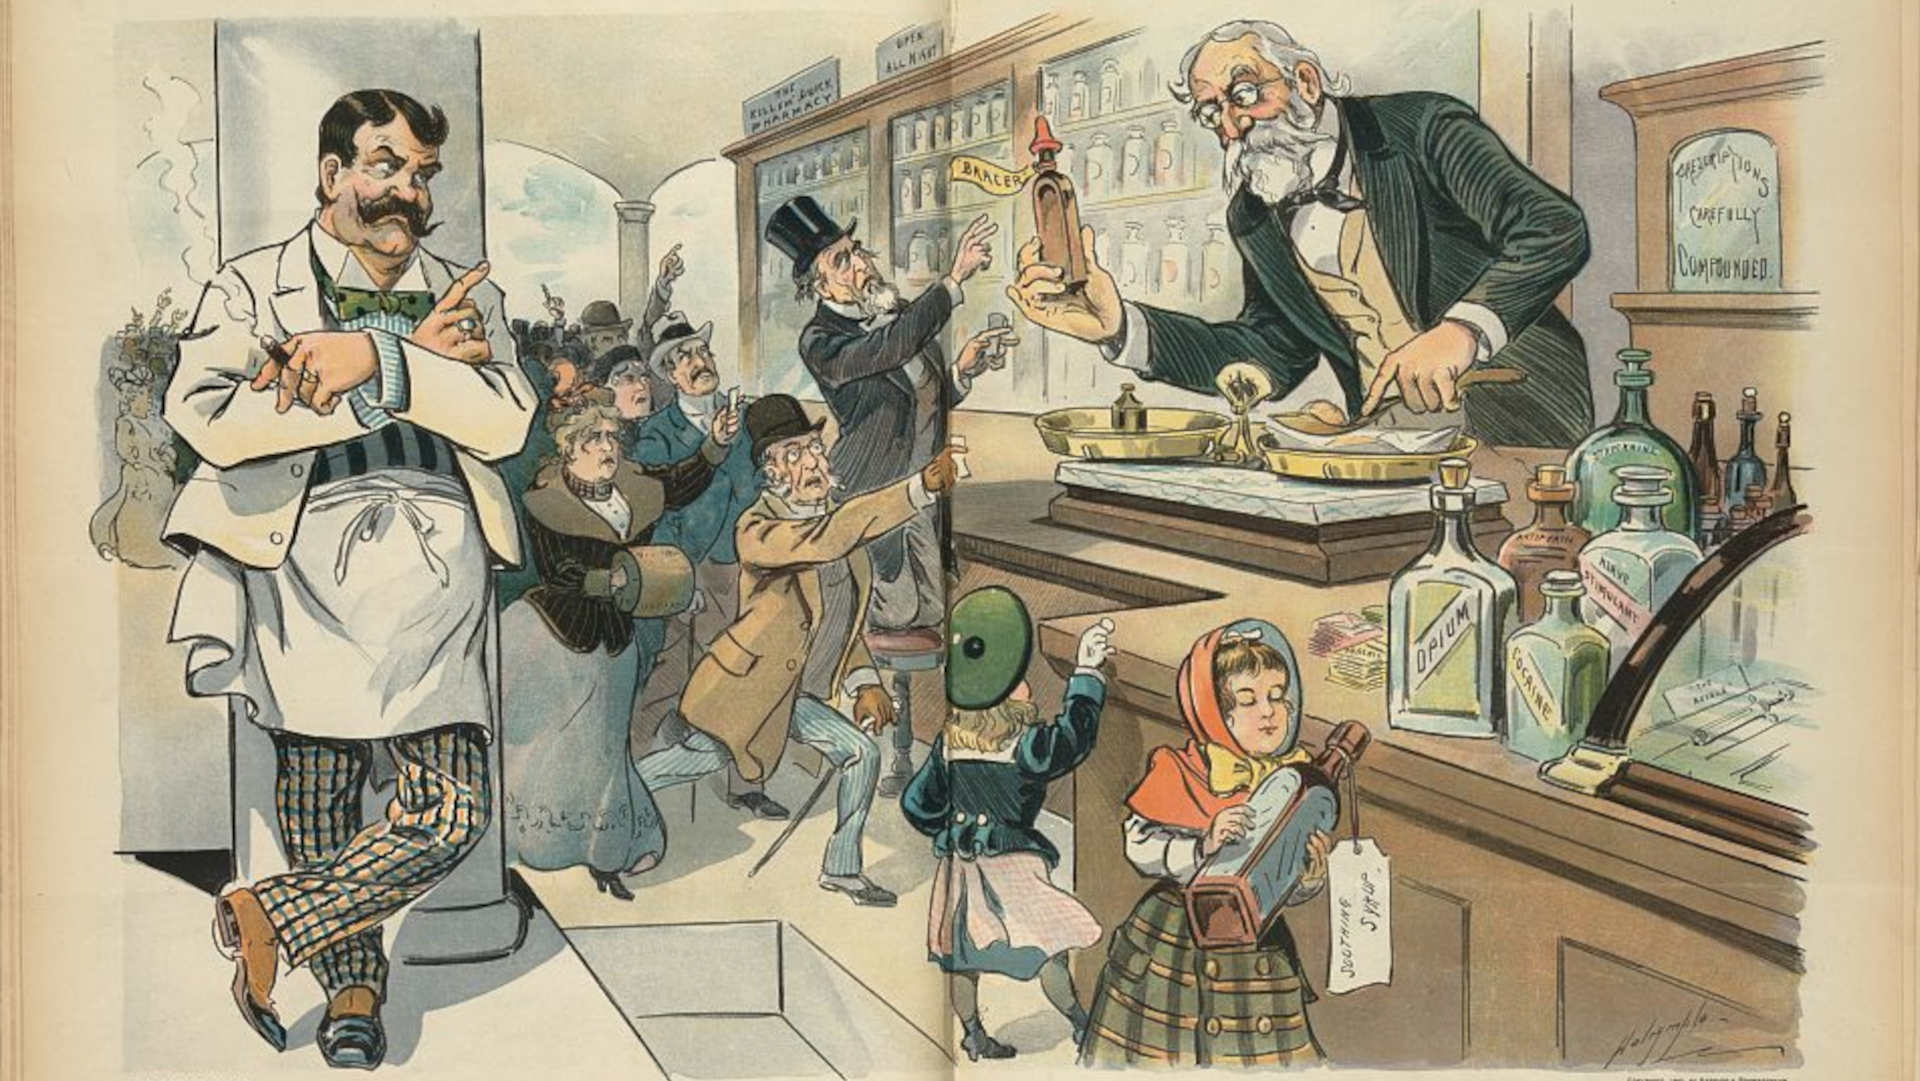 A cartoon illustration of a drugstore from the magazine Puck, published in 1900. At that time, opioids and needle kits could be bought over the counter.